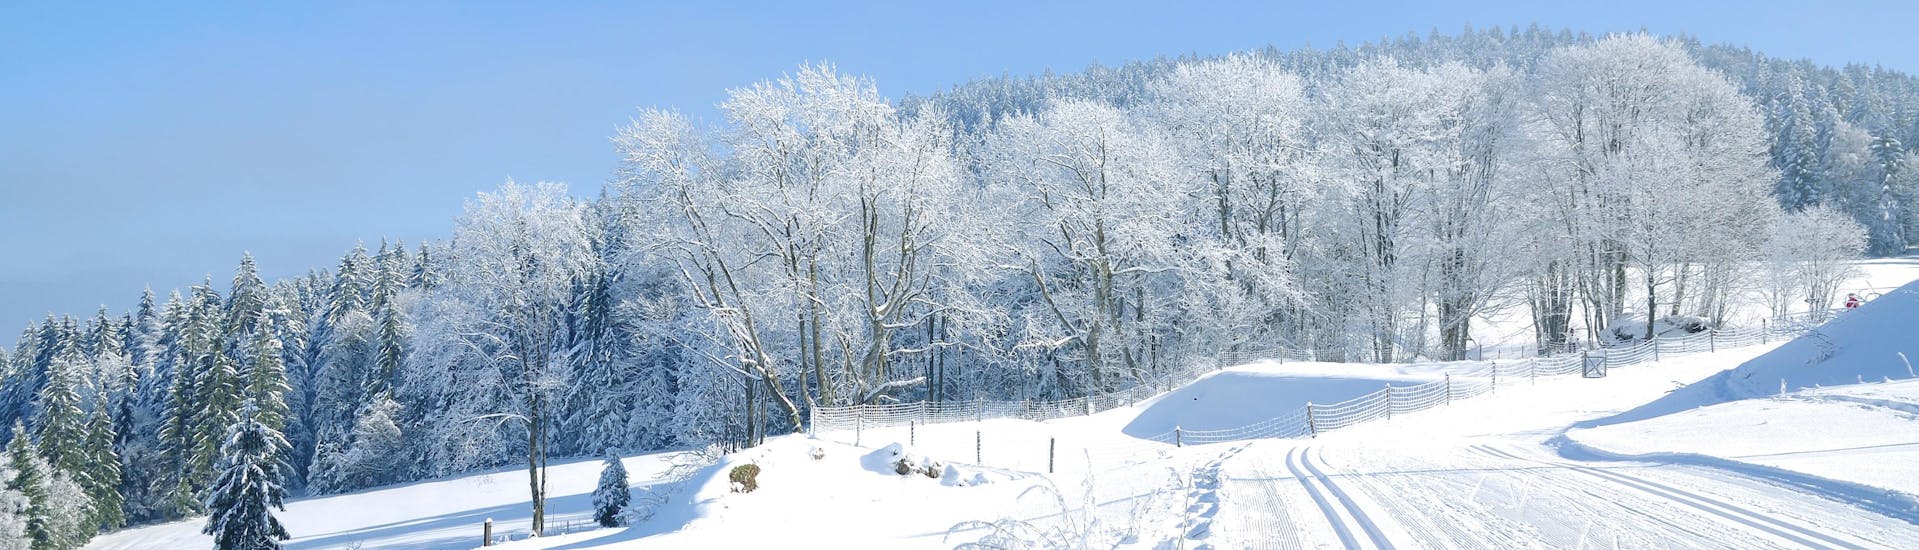 Image of the ski slopes in Bavarian Forest where you can book ski lessons.